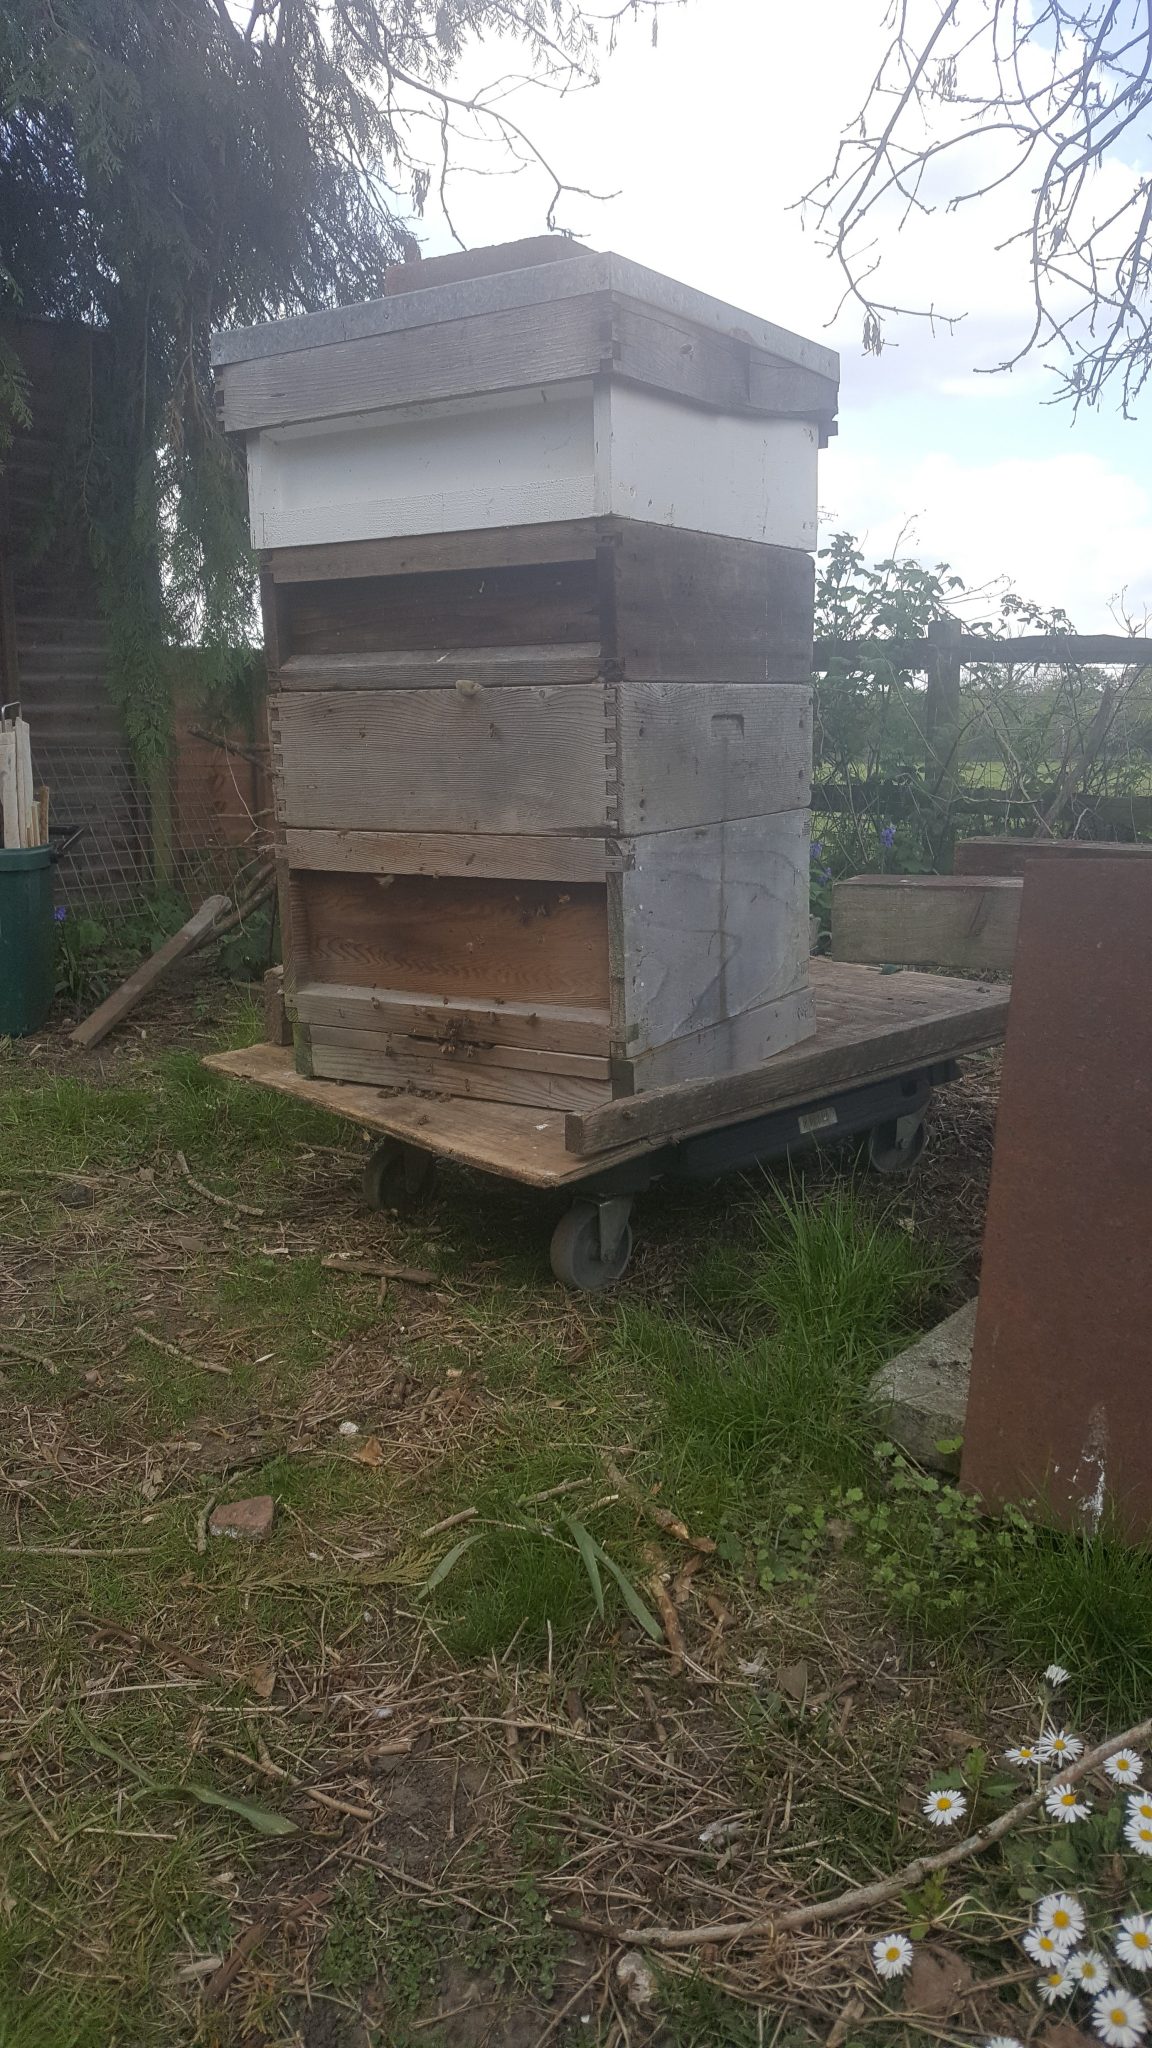 A trolley is useful to move bees.